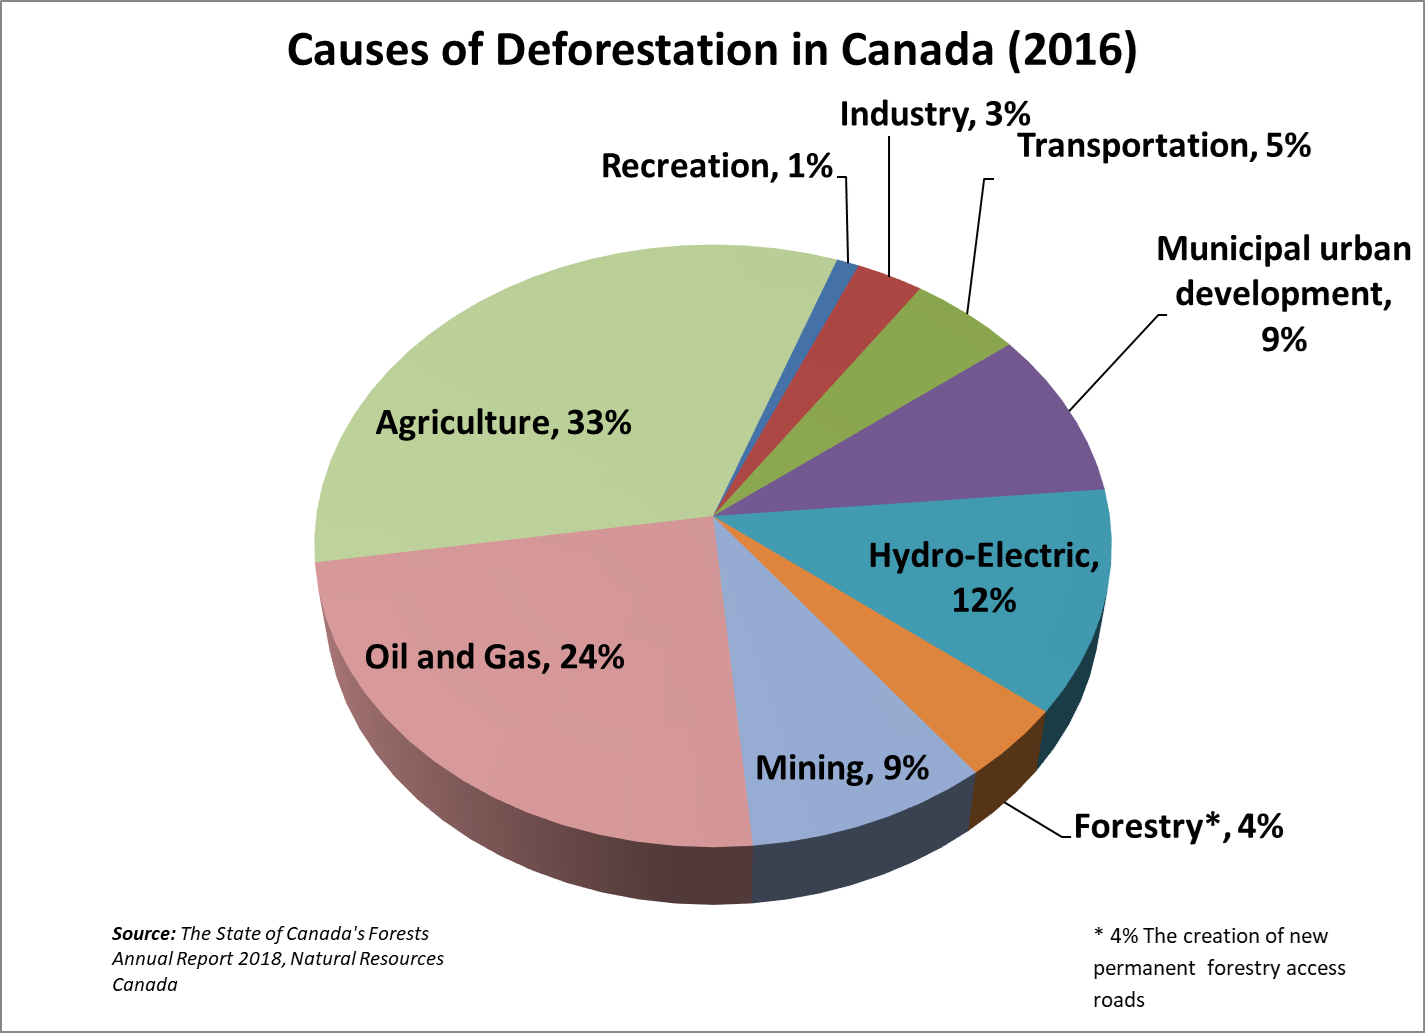 PPEC: False claims and sloppy journalism confuse the deforestation issue -  Pulp and Paper Canada